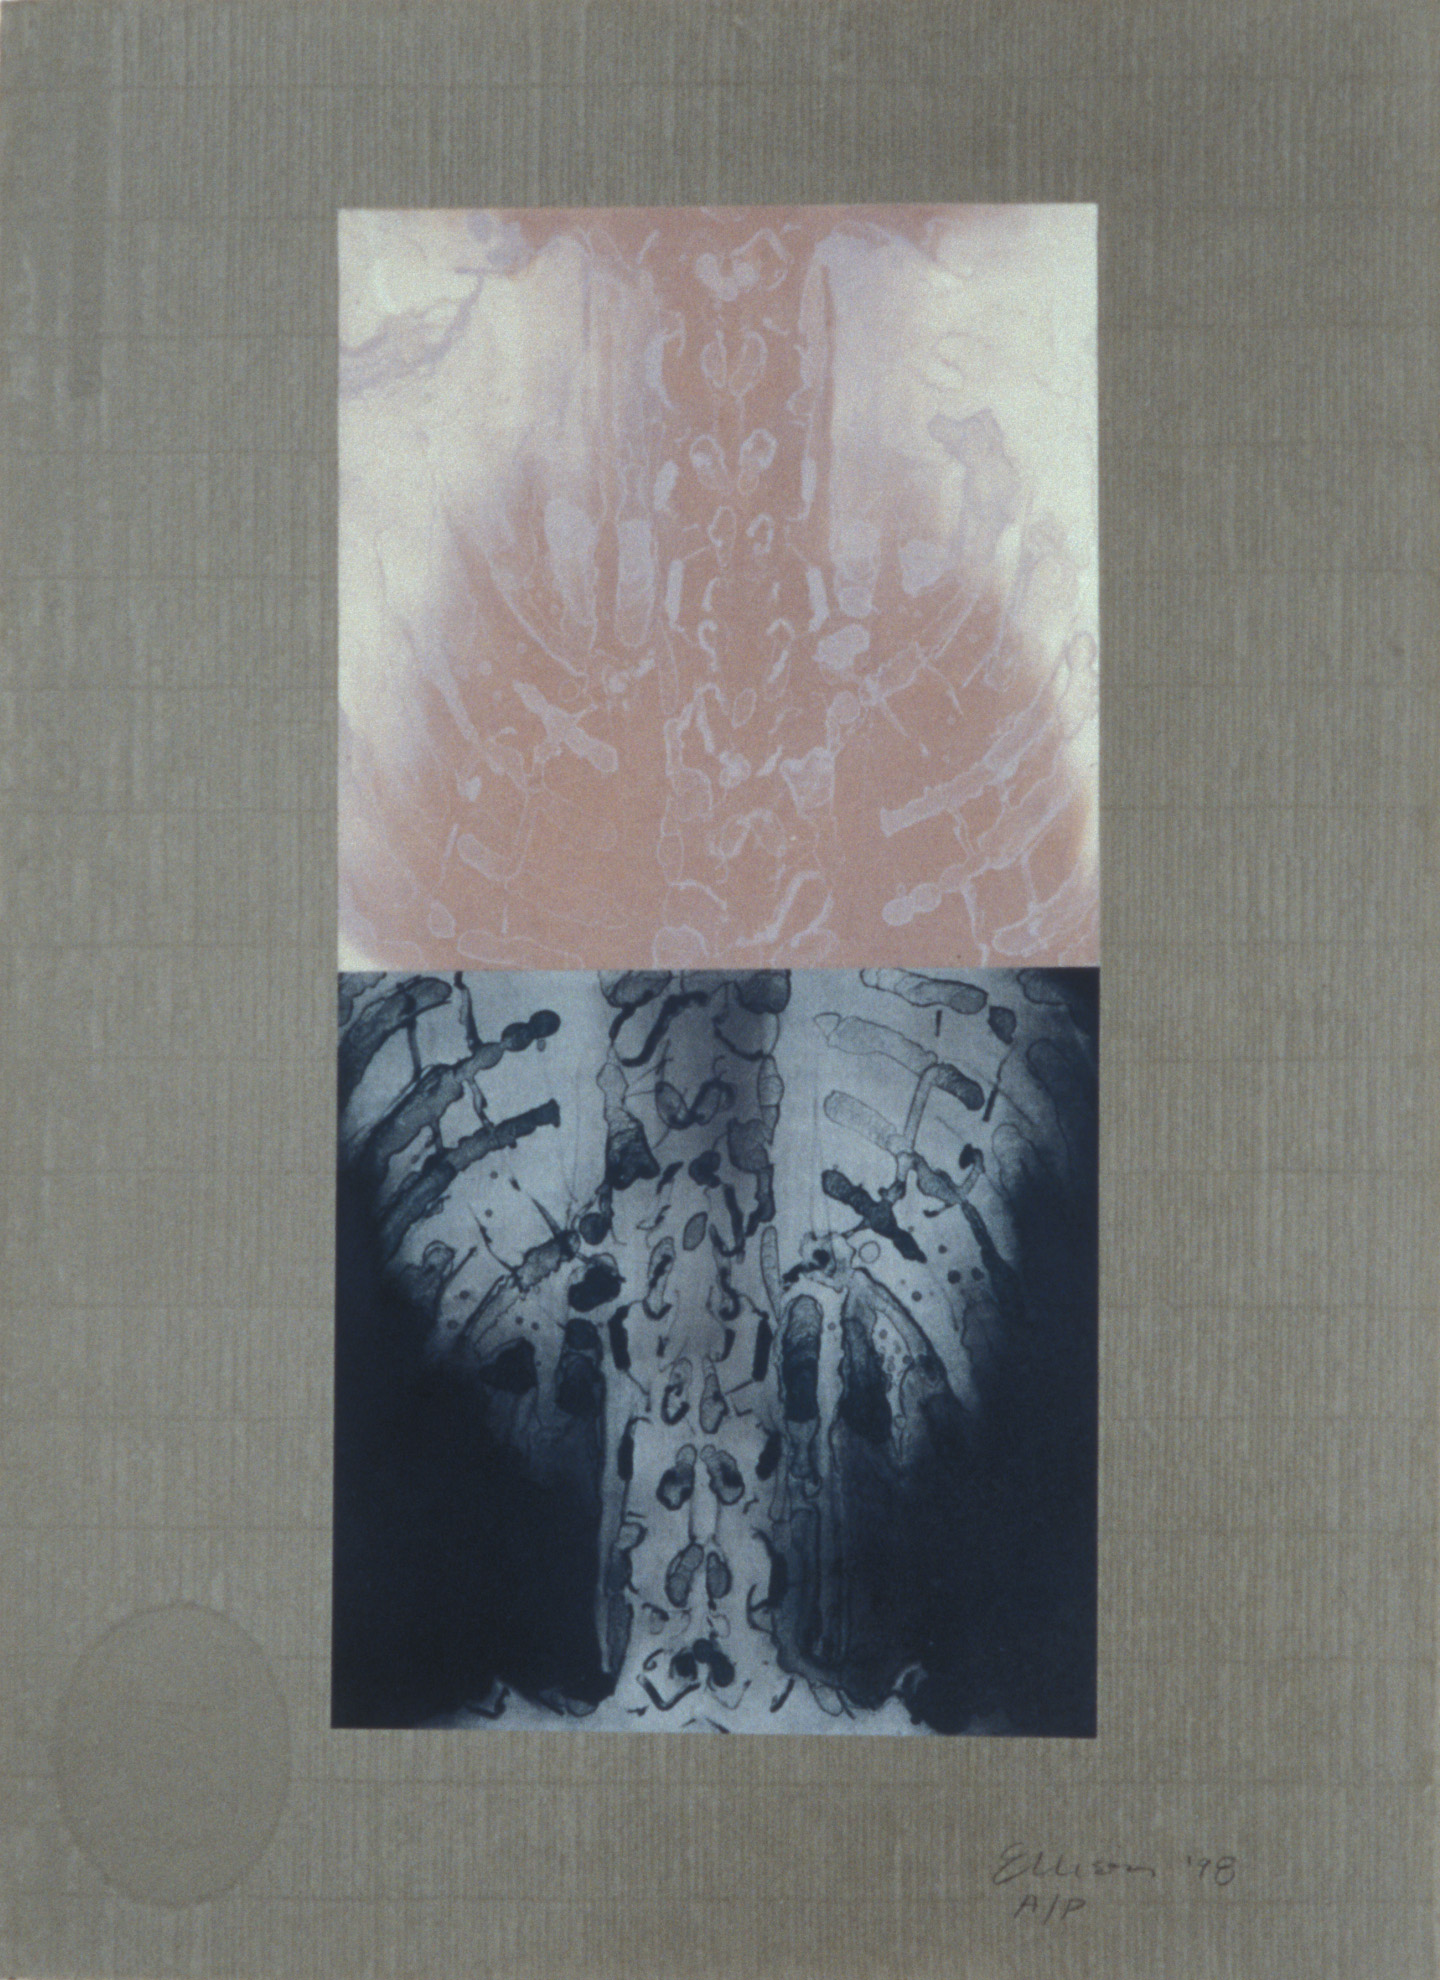  “Double Spine Pink,” 2001, monotype with lithograph chine collé on Roma paper, 28” x 20.”      